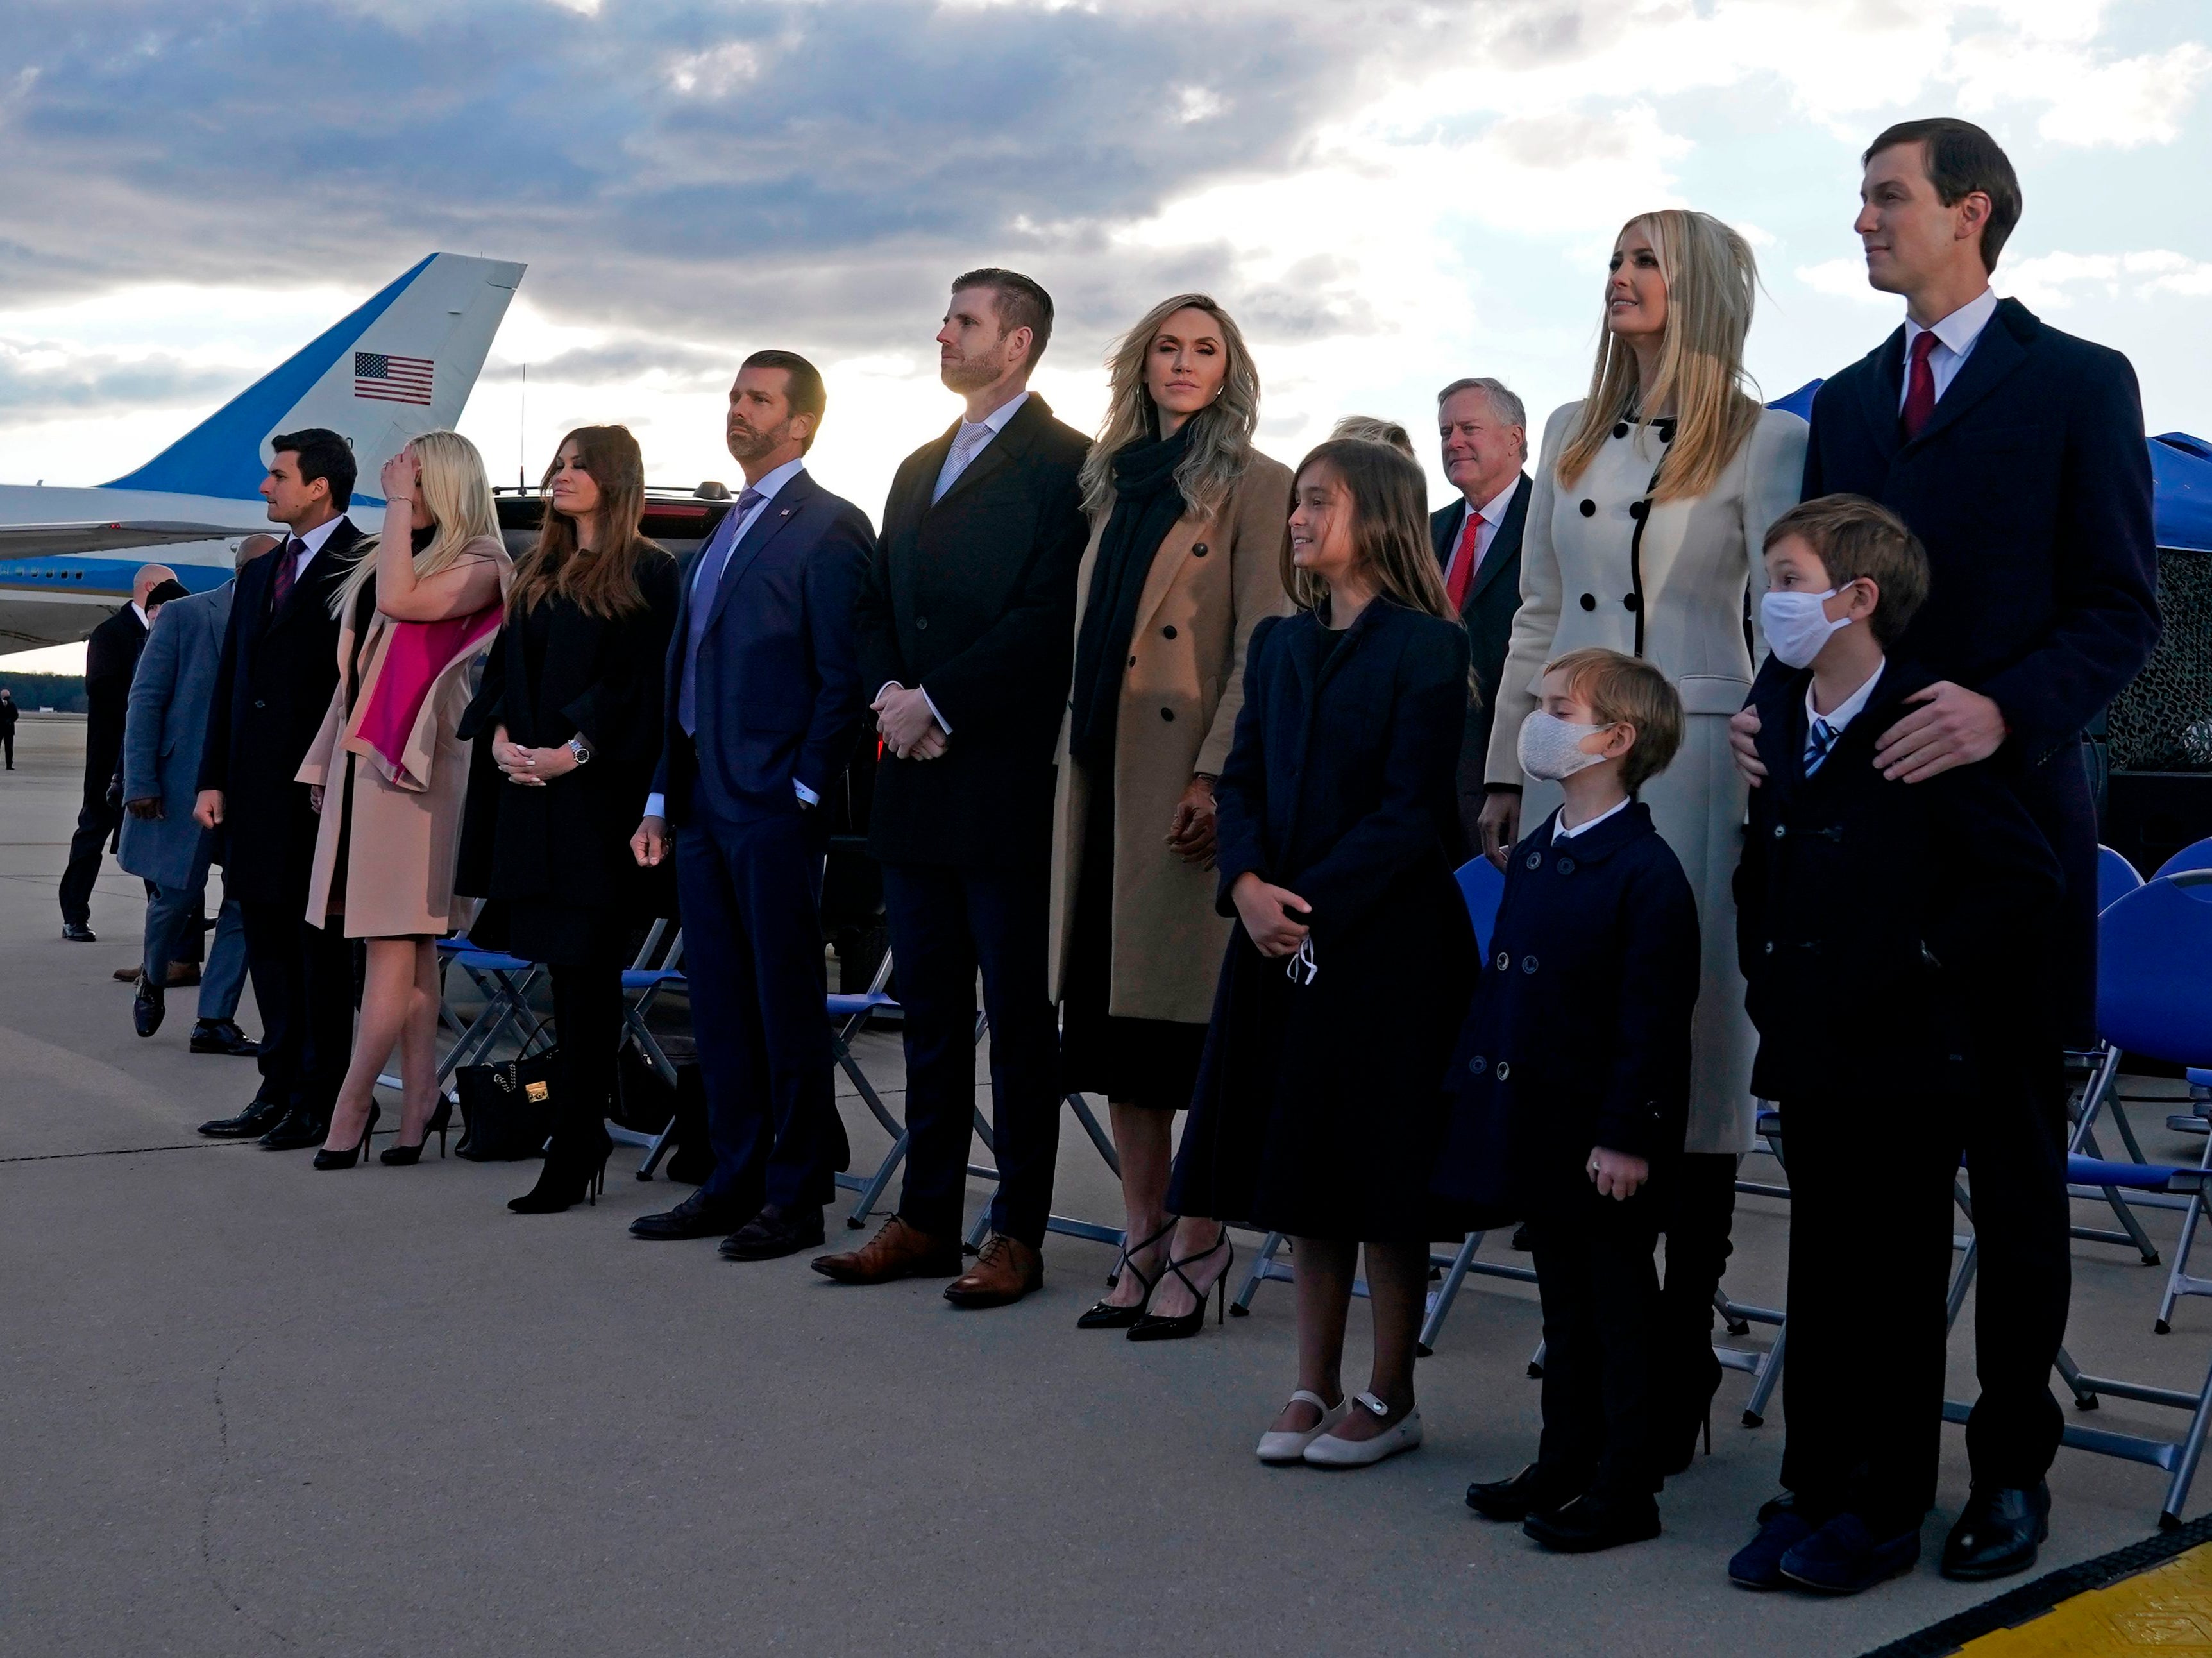 Members of Donald Trump’s family including senior advisors Ivanka Trump and Jared Kushner stand on the tarmac at Joint Base Andrews in Maryland as they arrive for US President Donald Trump's departure ceremony